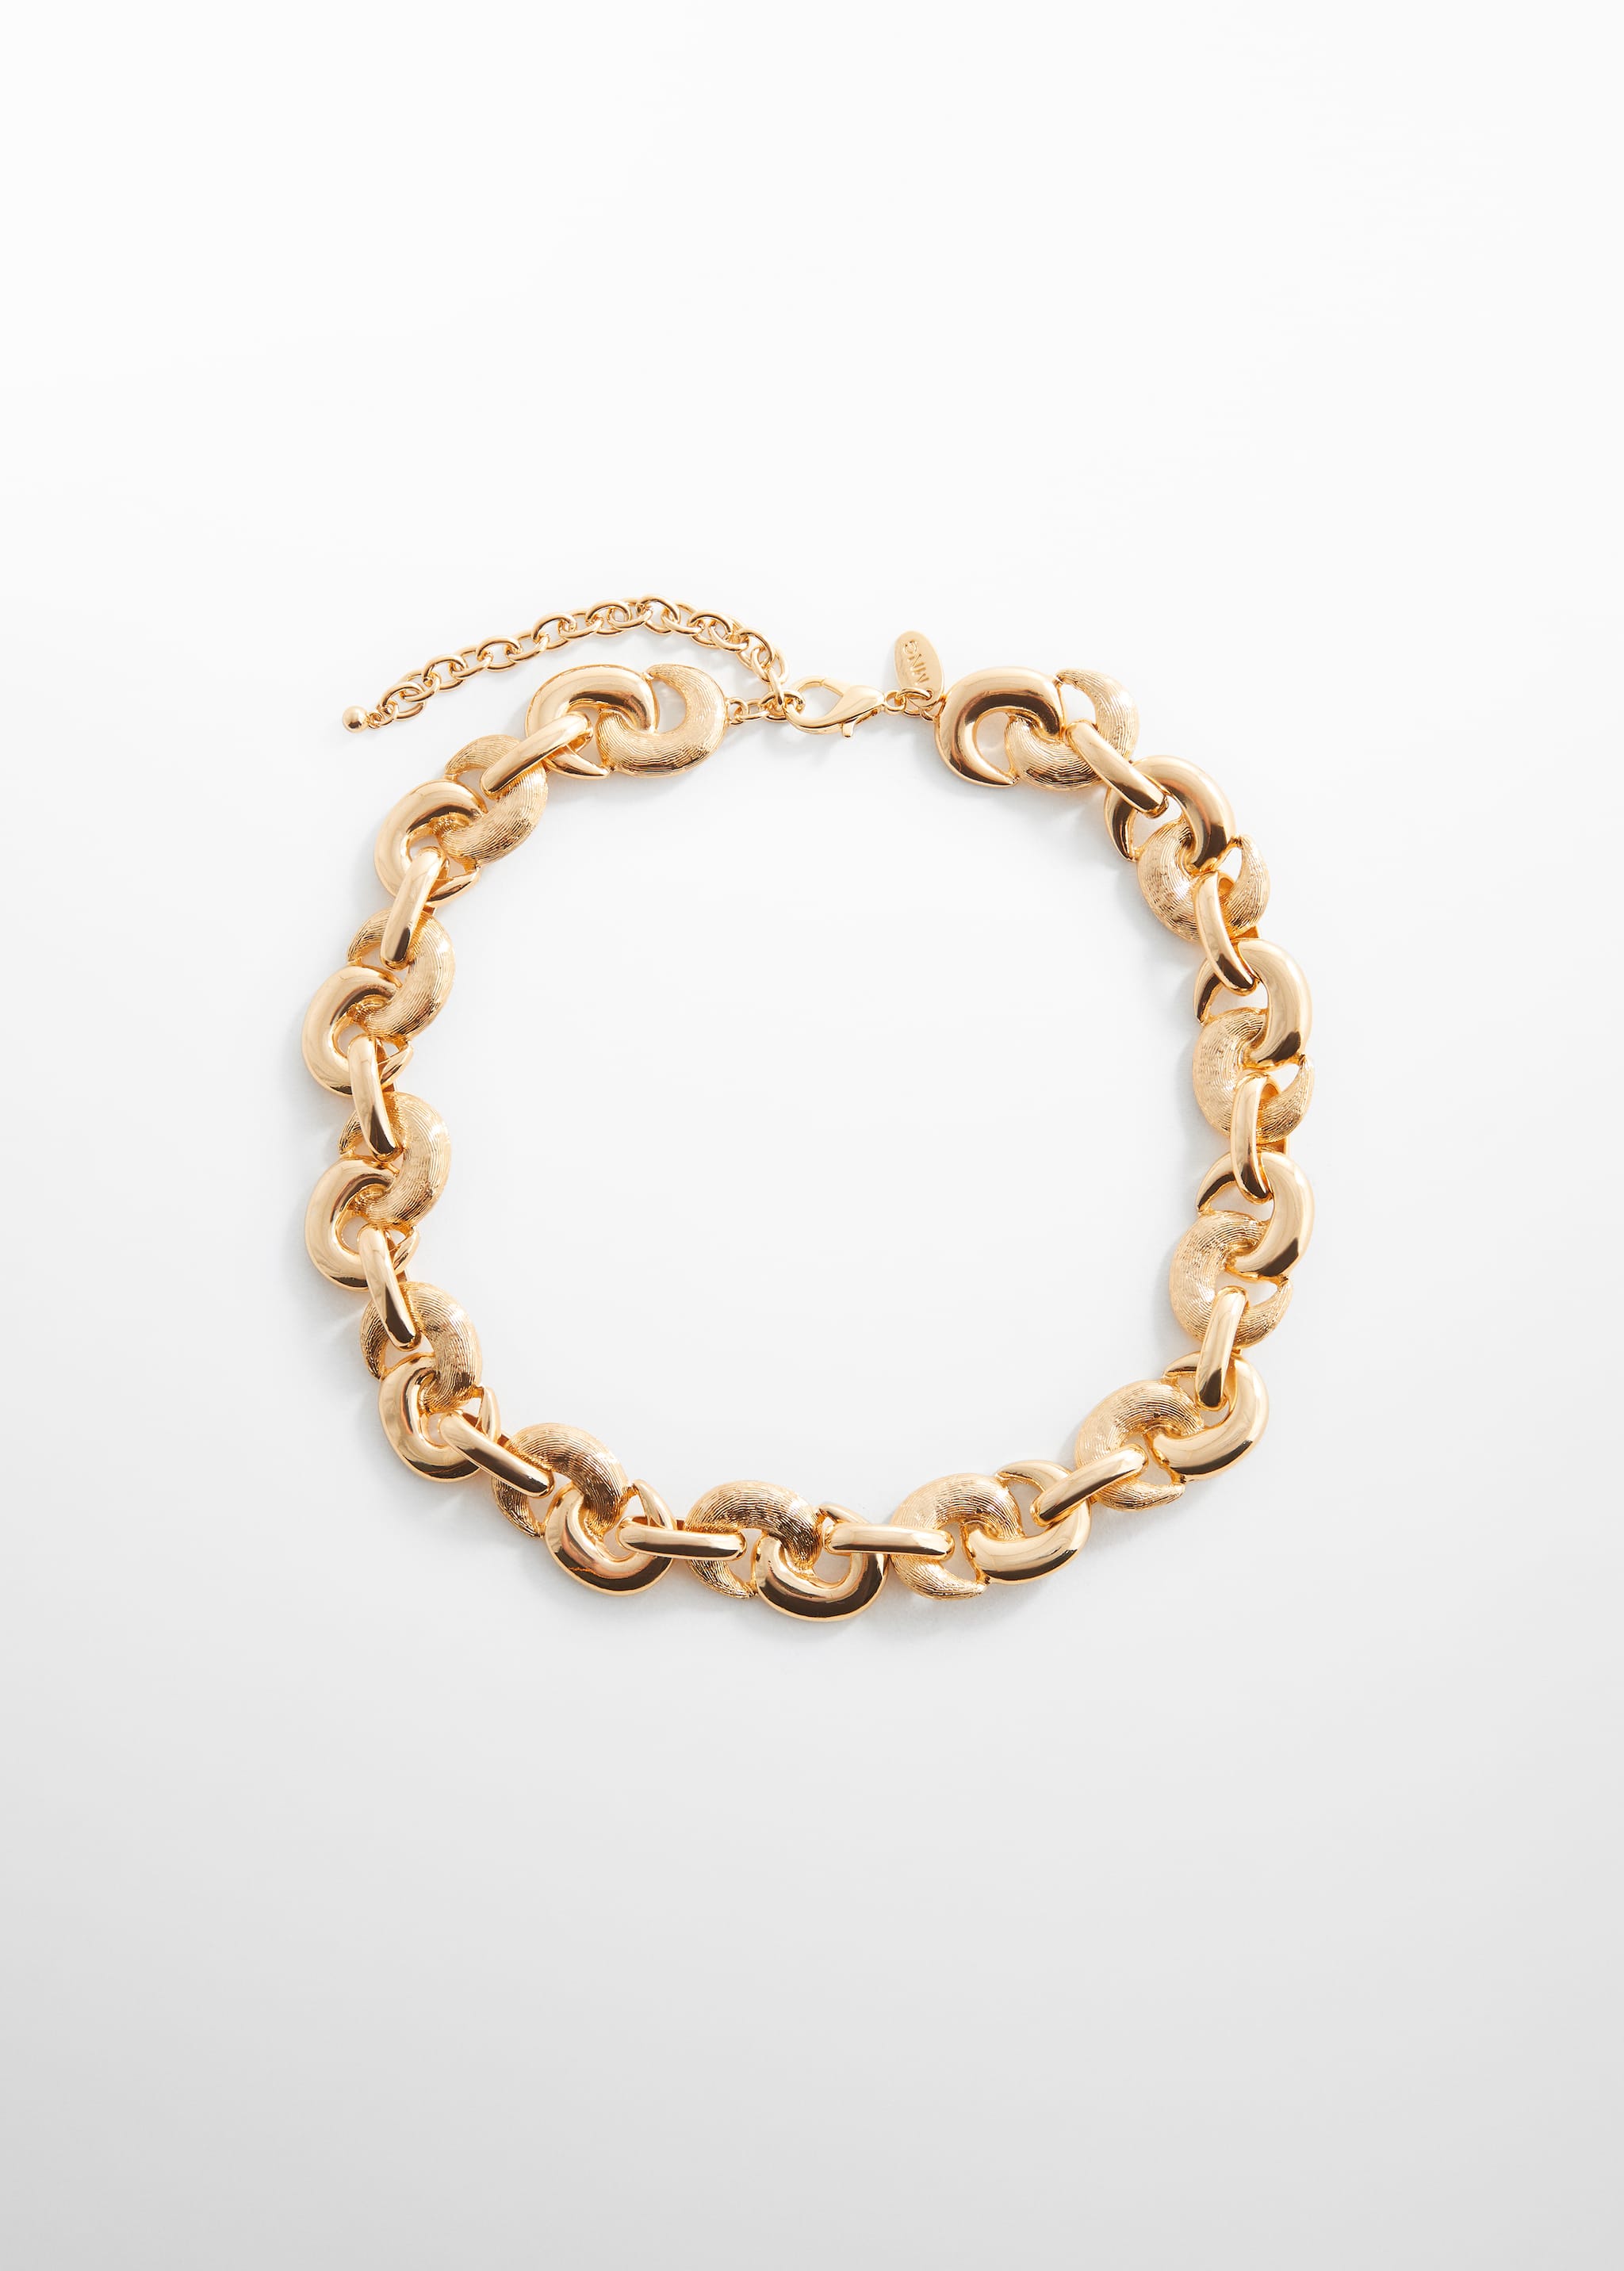 Textured chain necklace - Article without model